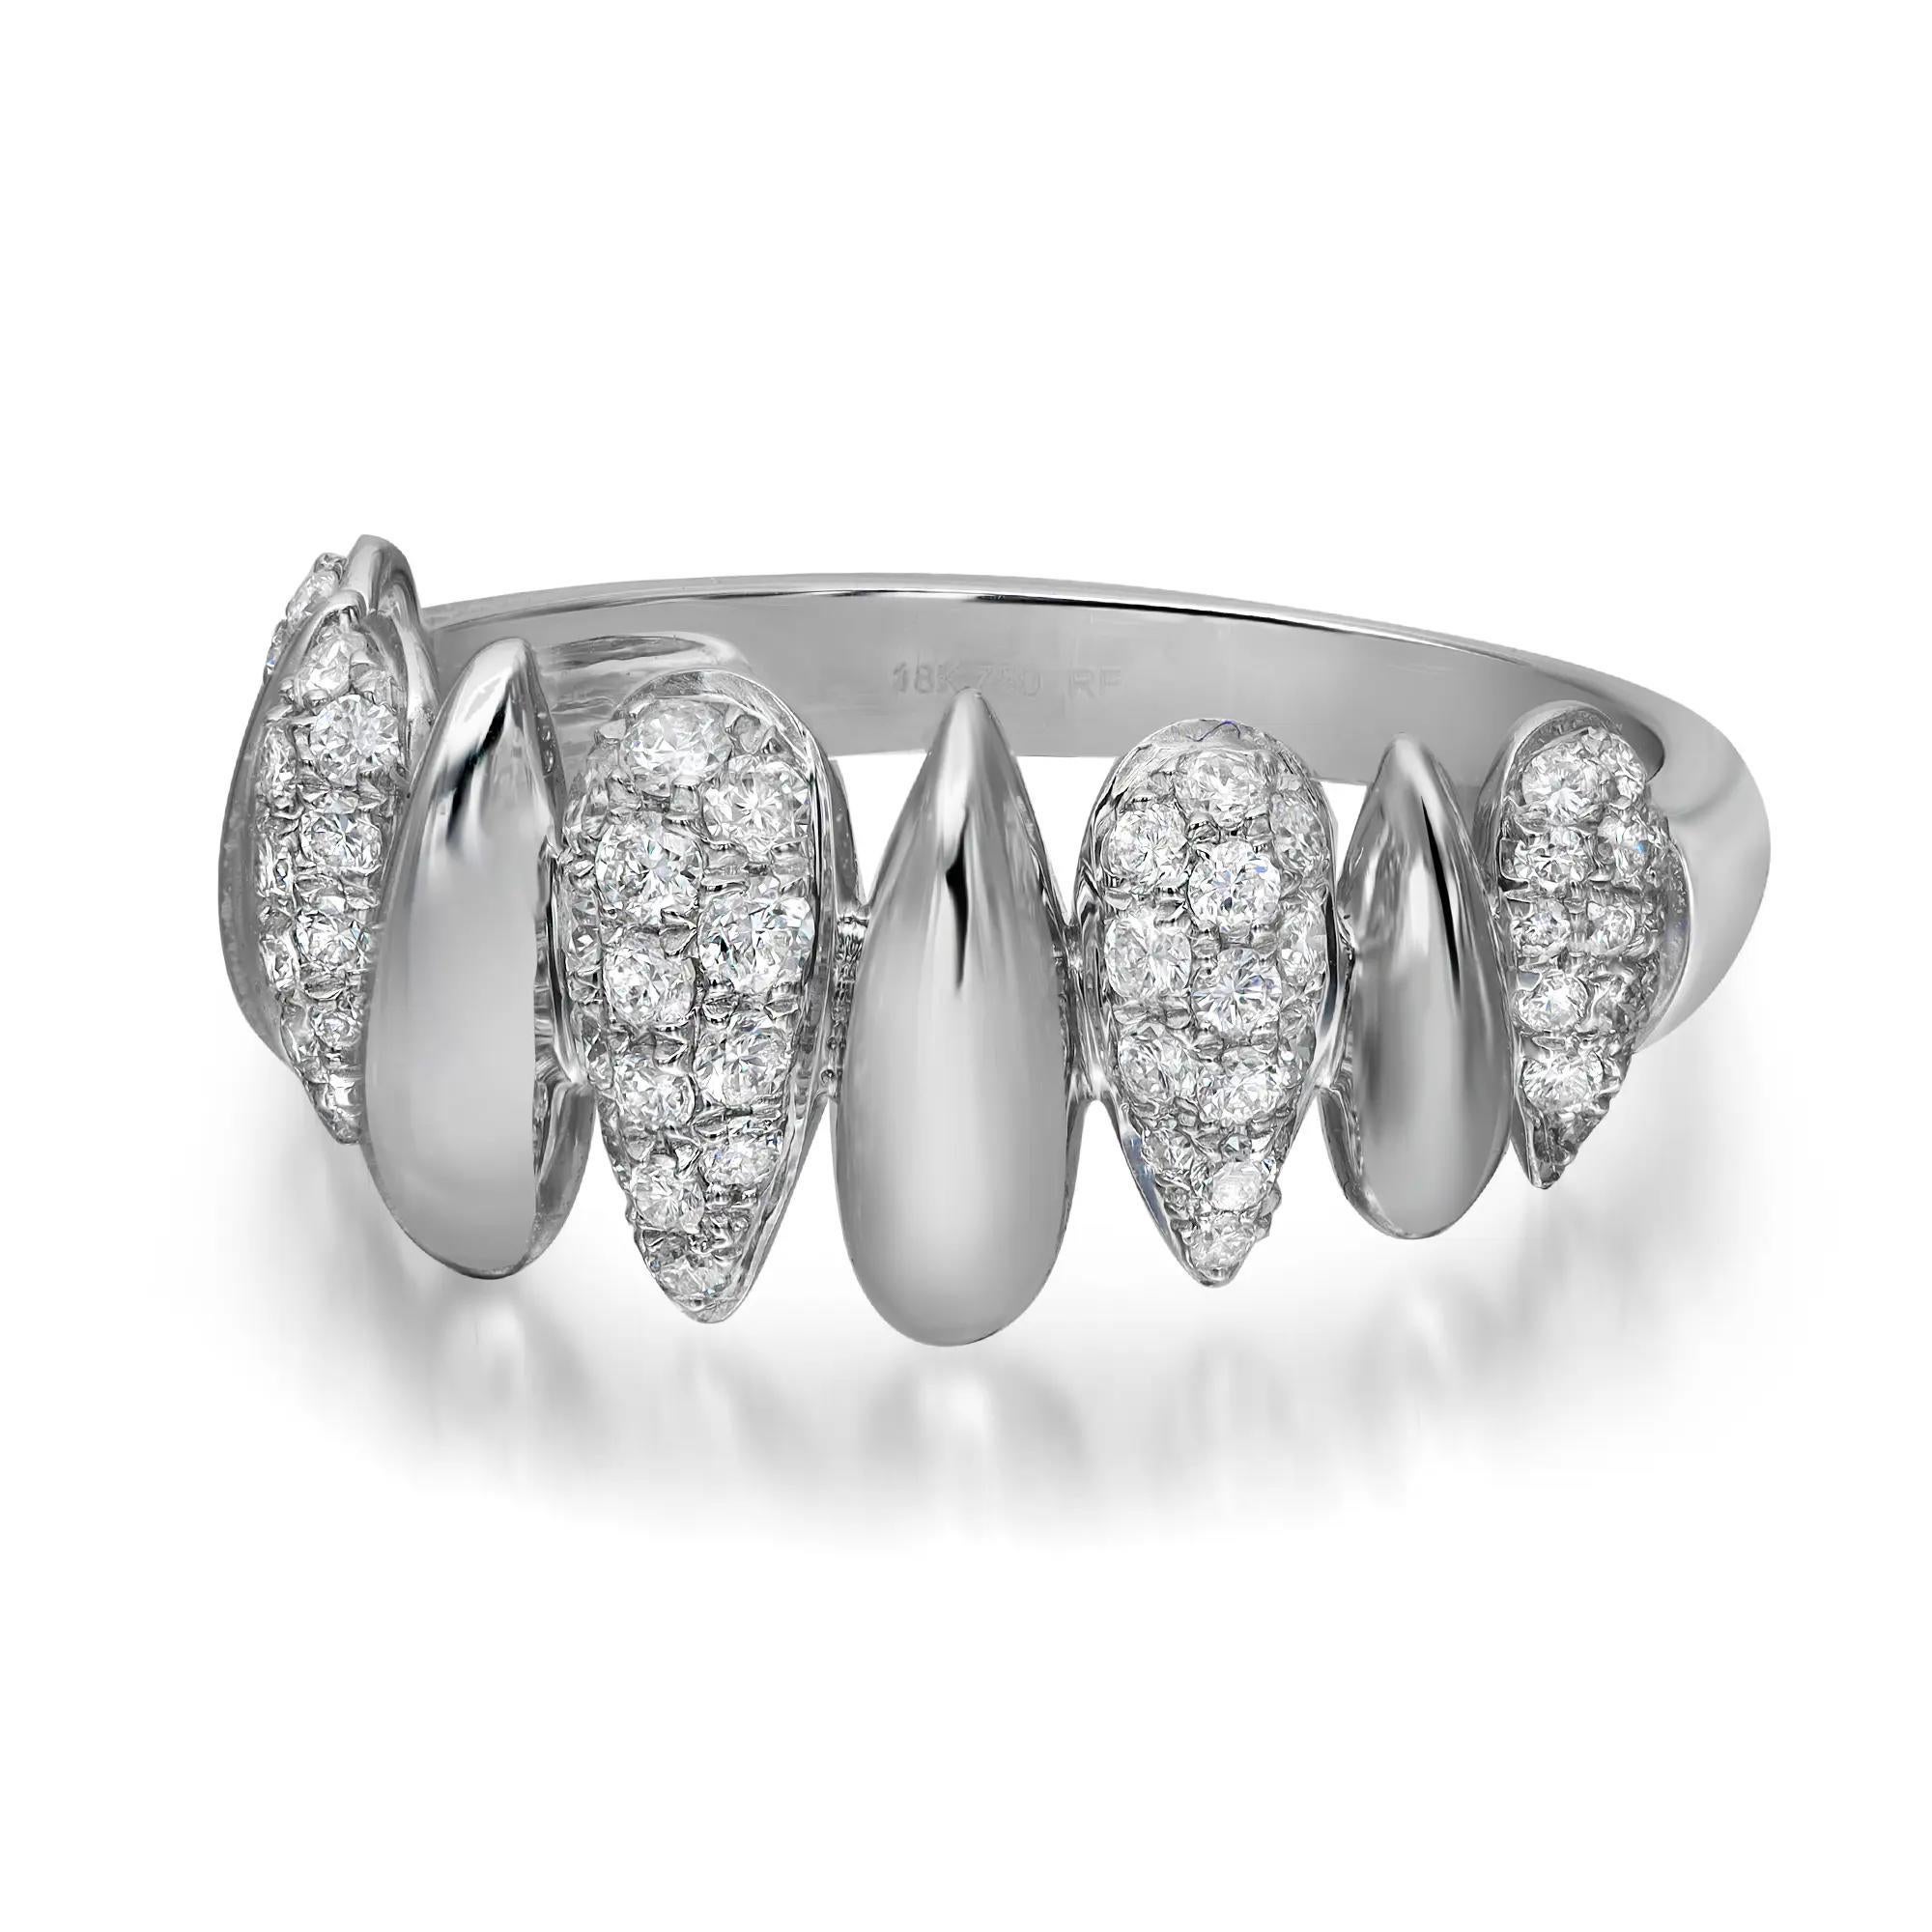 This beautiful diamond multi drop shaped band ring is all about sparkle and glamour. Crafted in high polished 18k white gold. This ring features 70 pave set round brilliant cut diamonds studded in alternate drop shaped shank designed halfway through